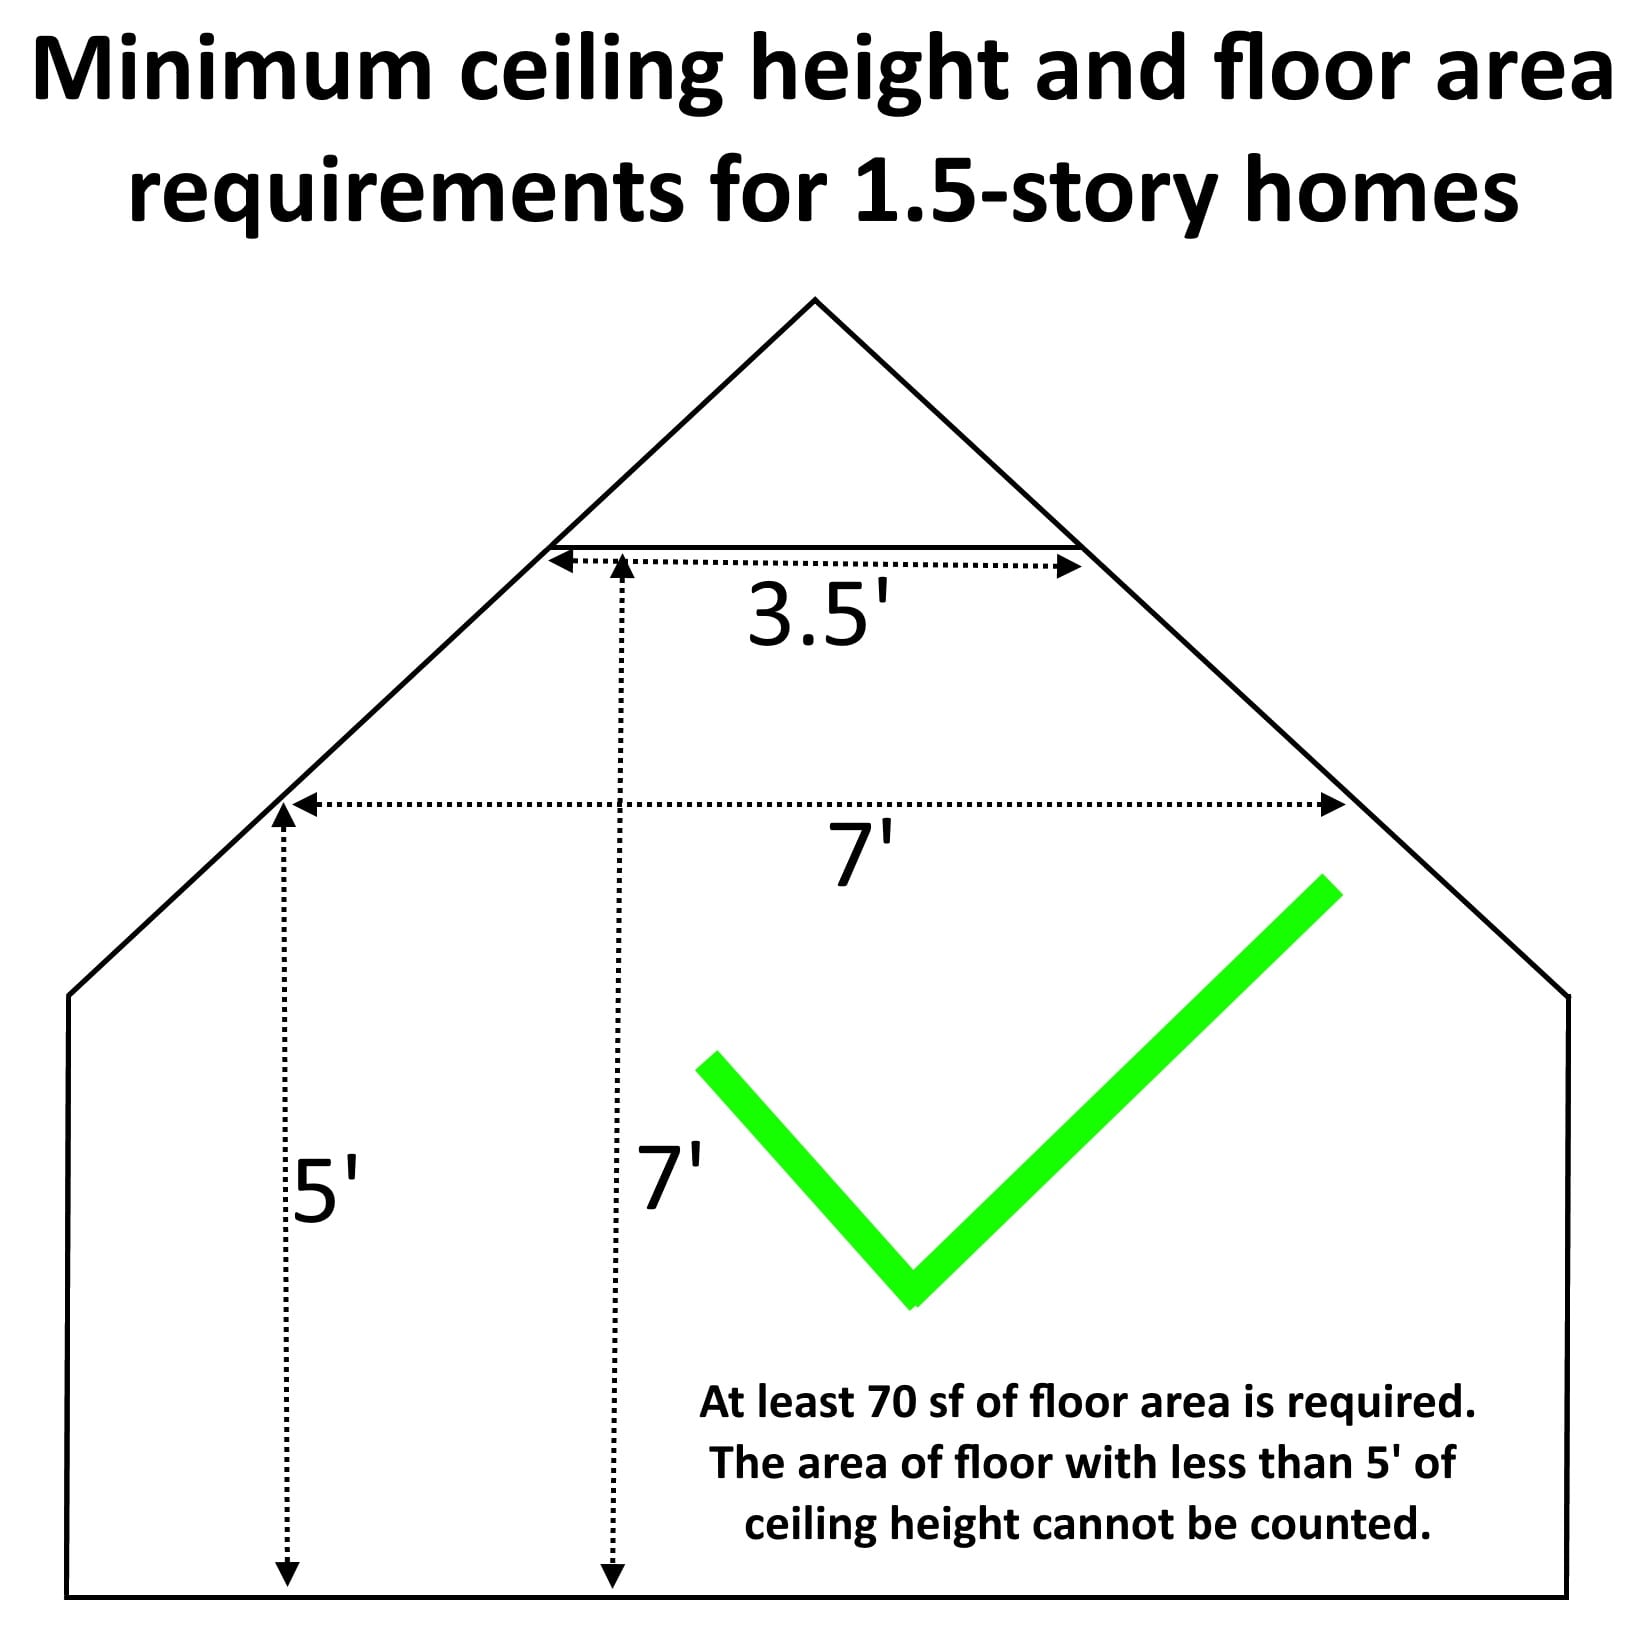 Bedroom Ceiling Height And Floor Area Requirements For 1 5 Story